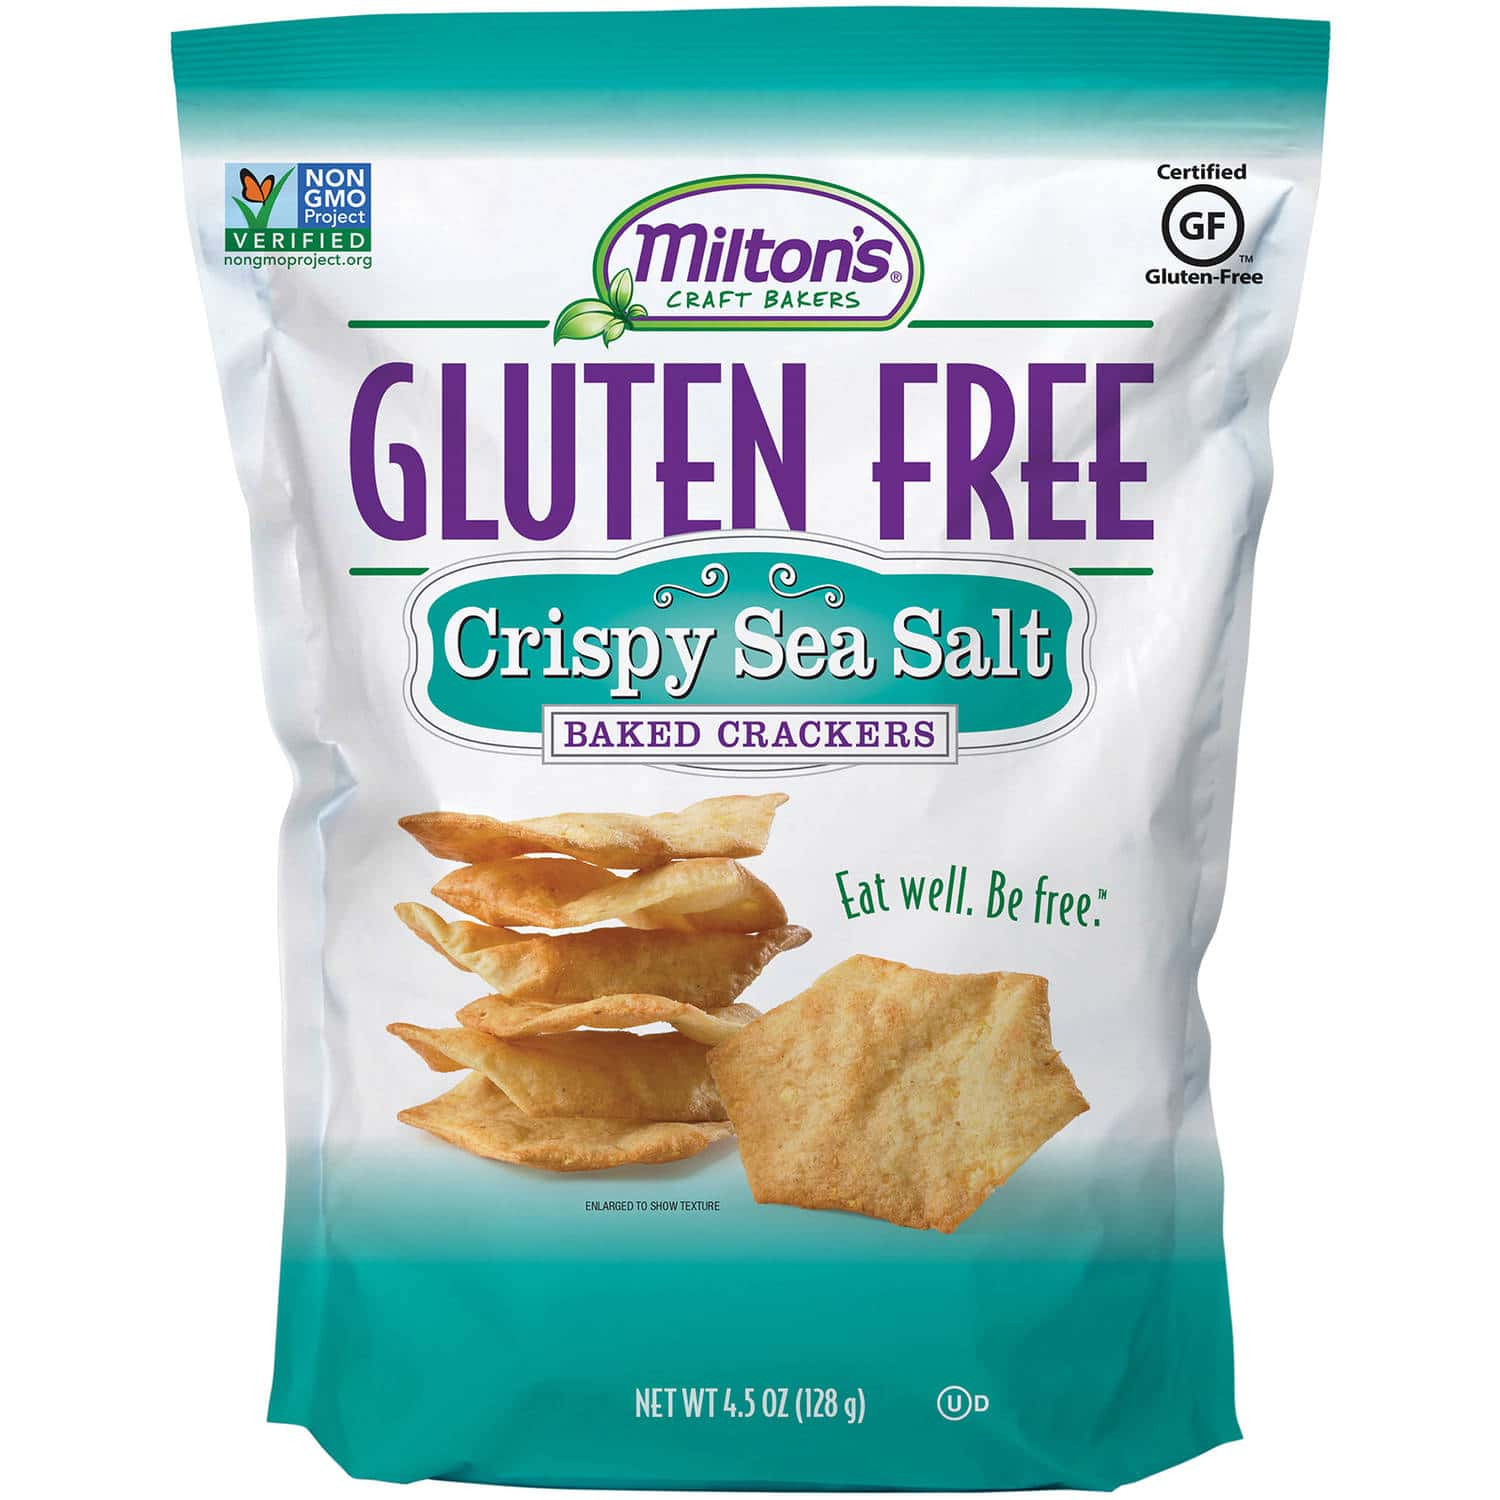 Gluten Free Crackers
 94 The Healthiest Clean Eating Packaged Foods You Can